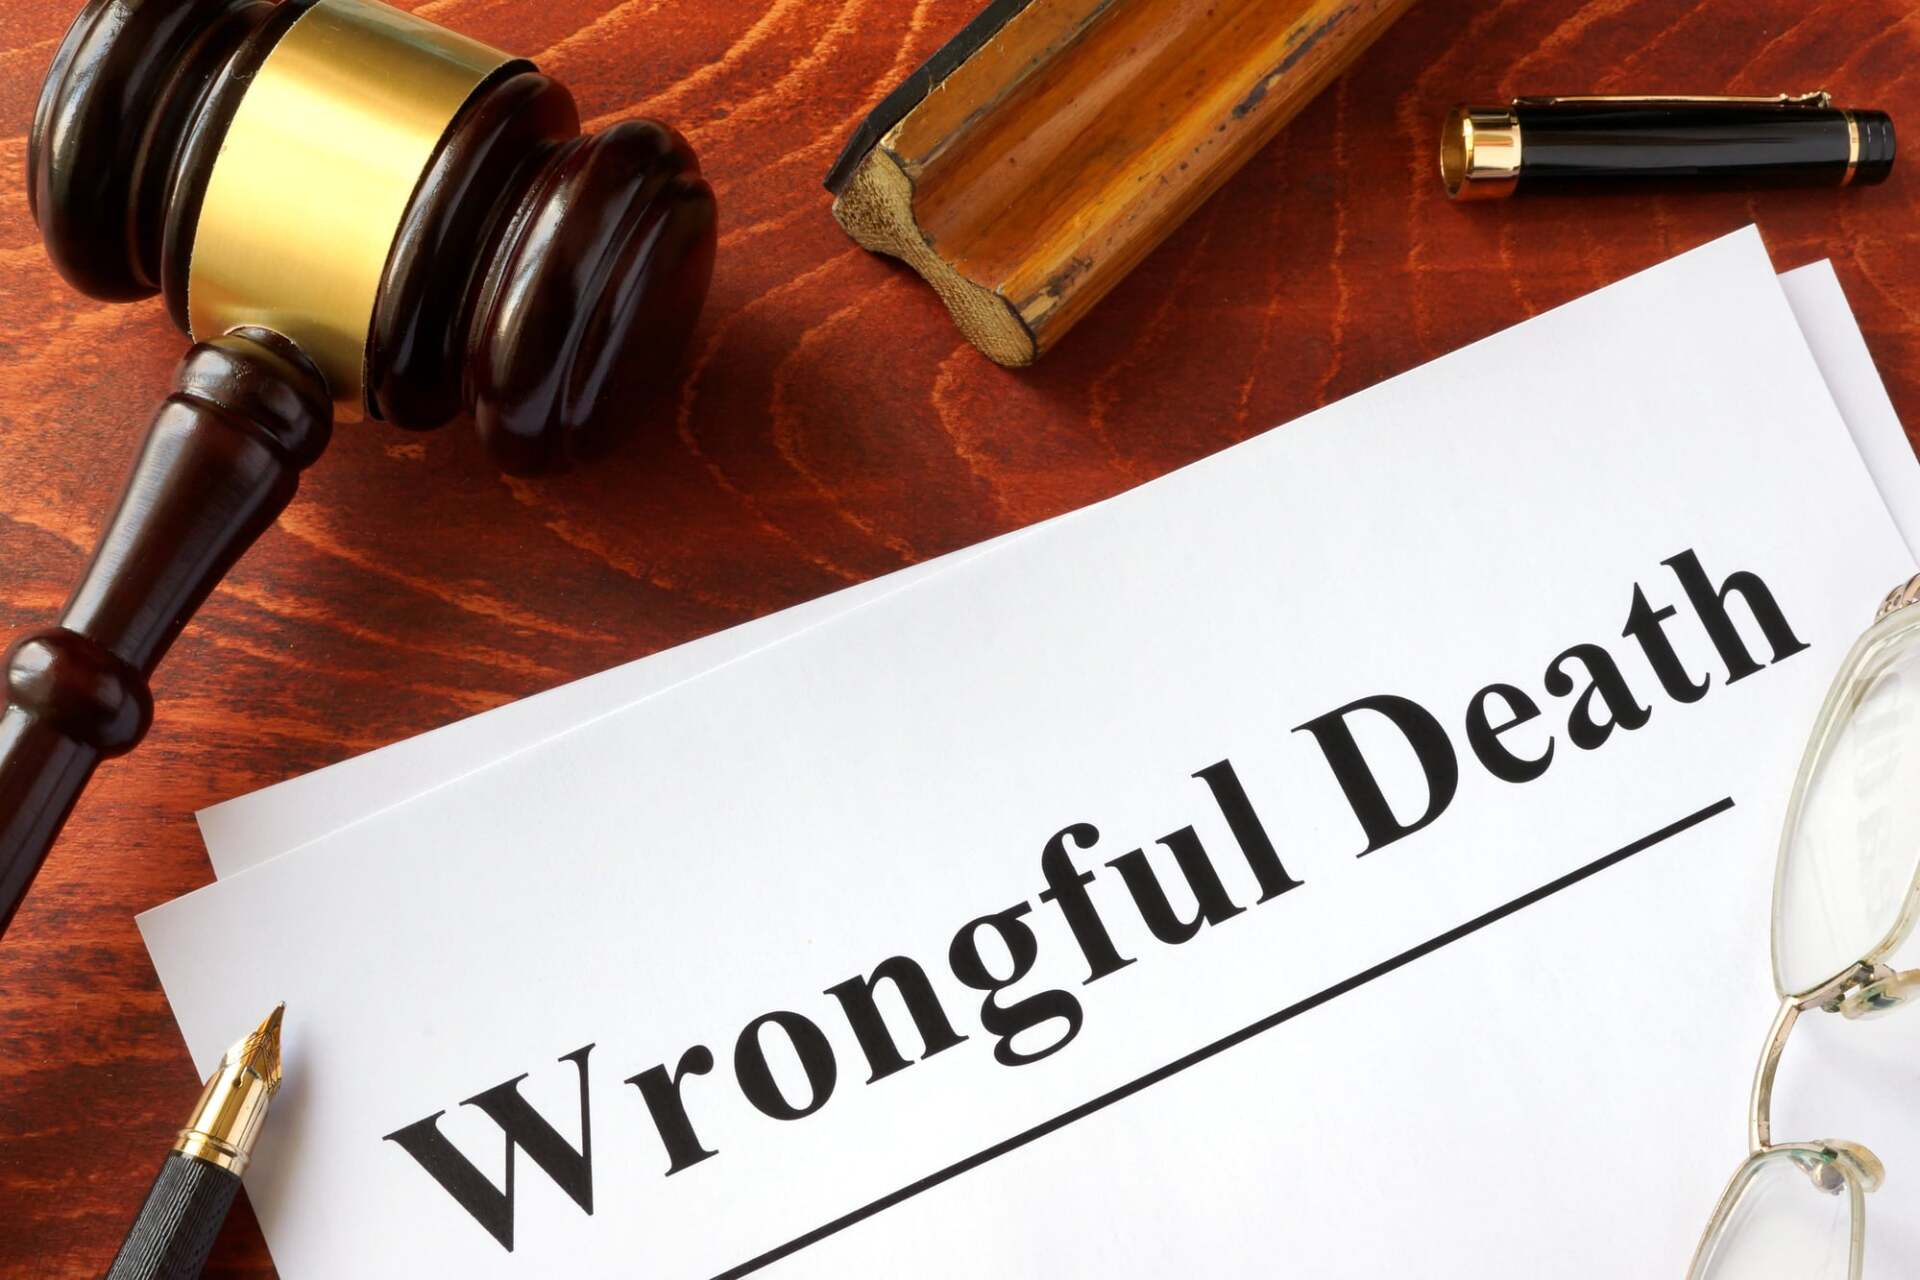 Wrongful Death Form — Milledgeville, GA — Brian G. Combs Attorney At Law